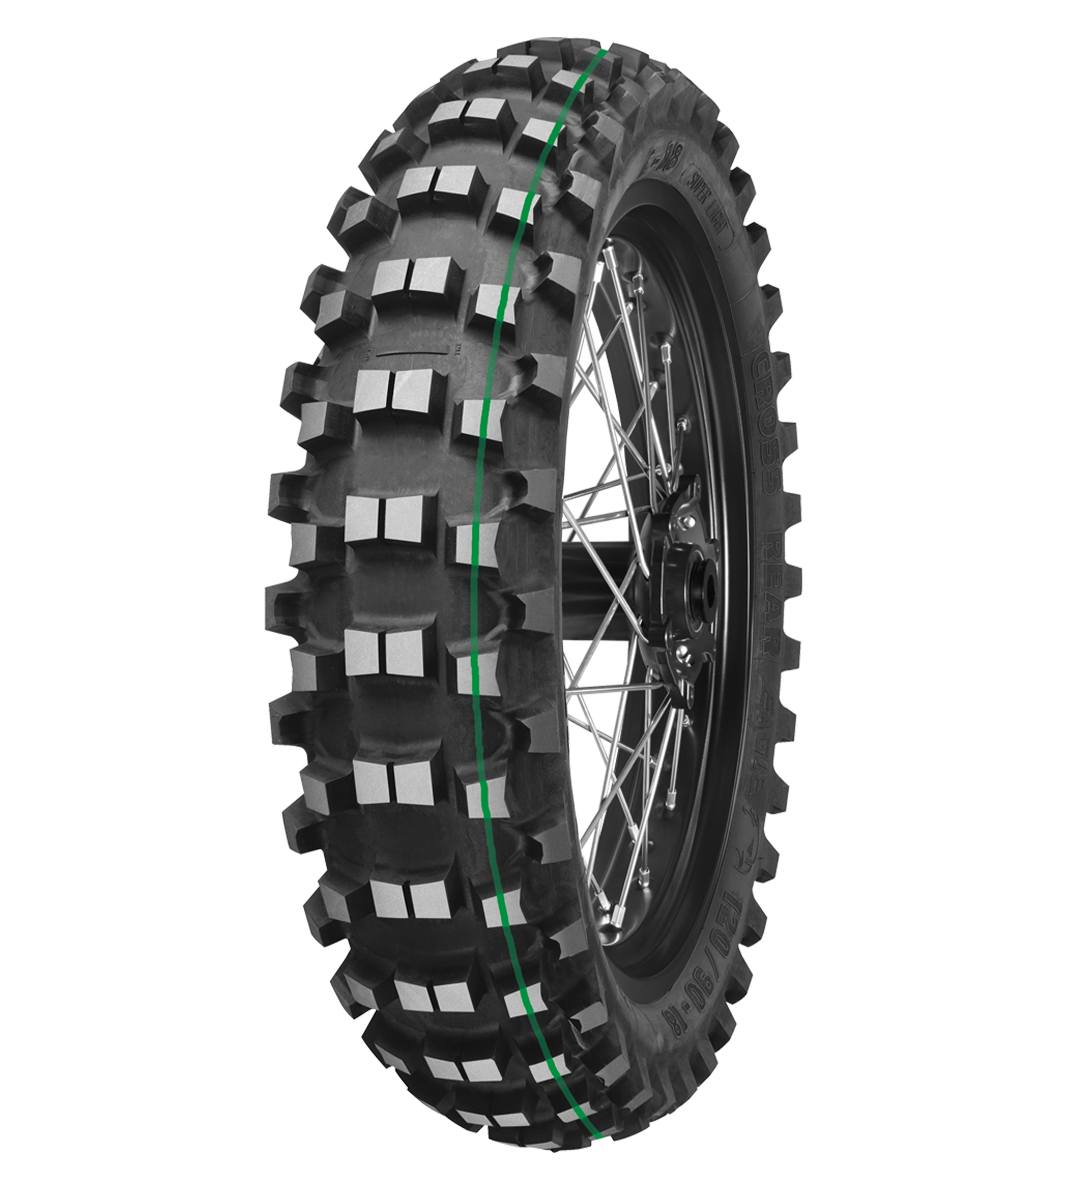 Mitas C-18 EAGLE 110/90-19 Enduro Competition Off-Road SUPER LIGHT 62M Green Tube Rear Tire, 226614, 110/90-19, C-18 Eagle, Enduro, Enduro Competition, Off-Road, Rear, Tires - Imported and distributed in North & South America by Lindeco Genuine Powersports - Premier Powersports Equipment and Accessories for Motorcycle Enthusiasts, Professional Riders and Dealers.